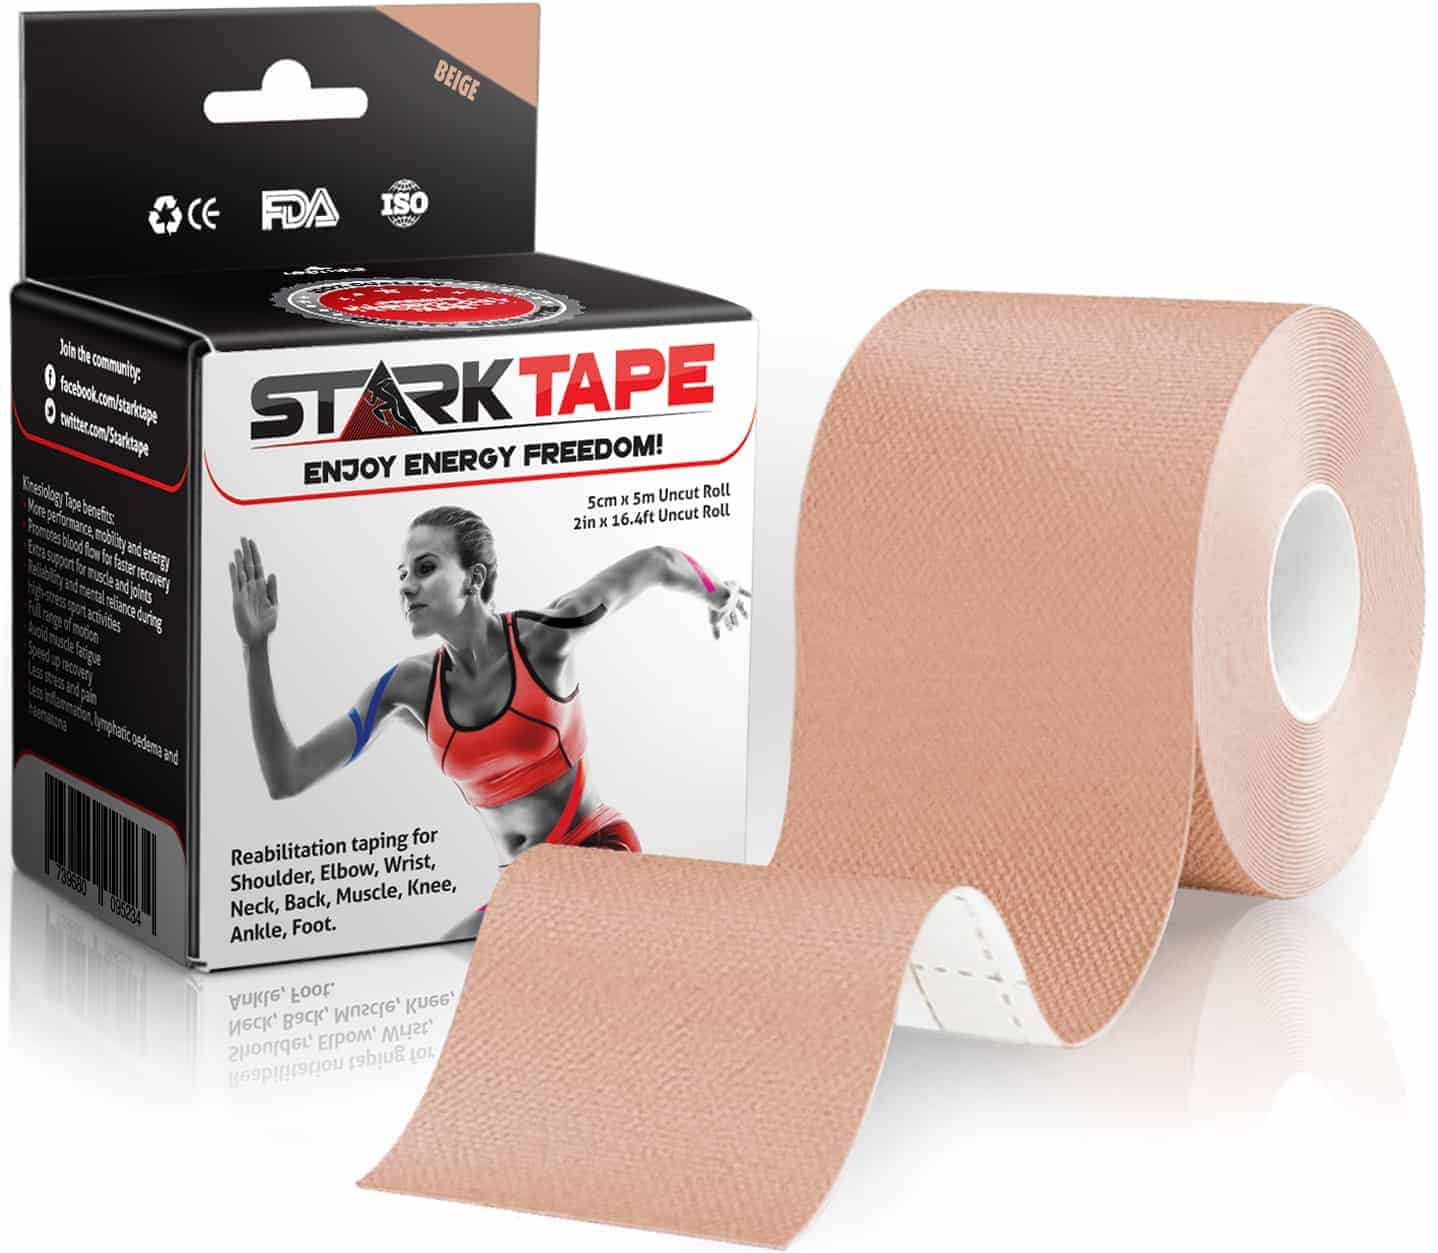 Kinesiology Tape Athletic Muscle Support Sport Elastic Physio Therapeutic  Roll 